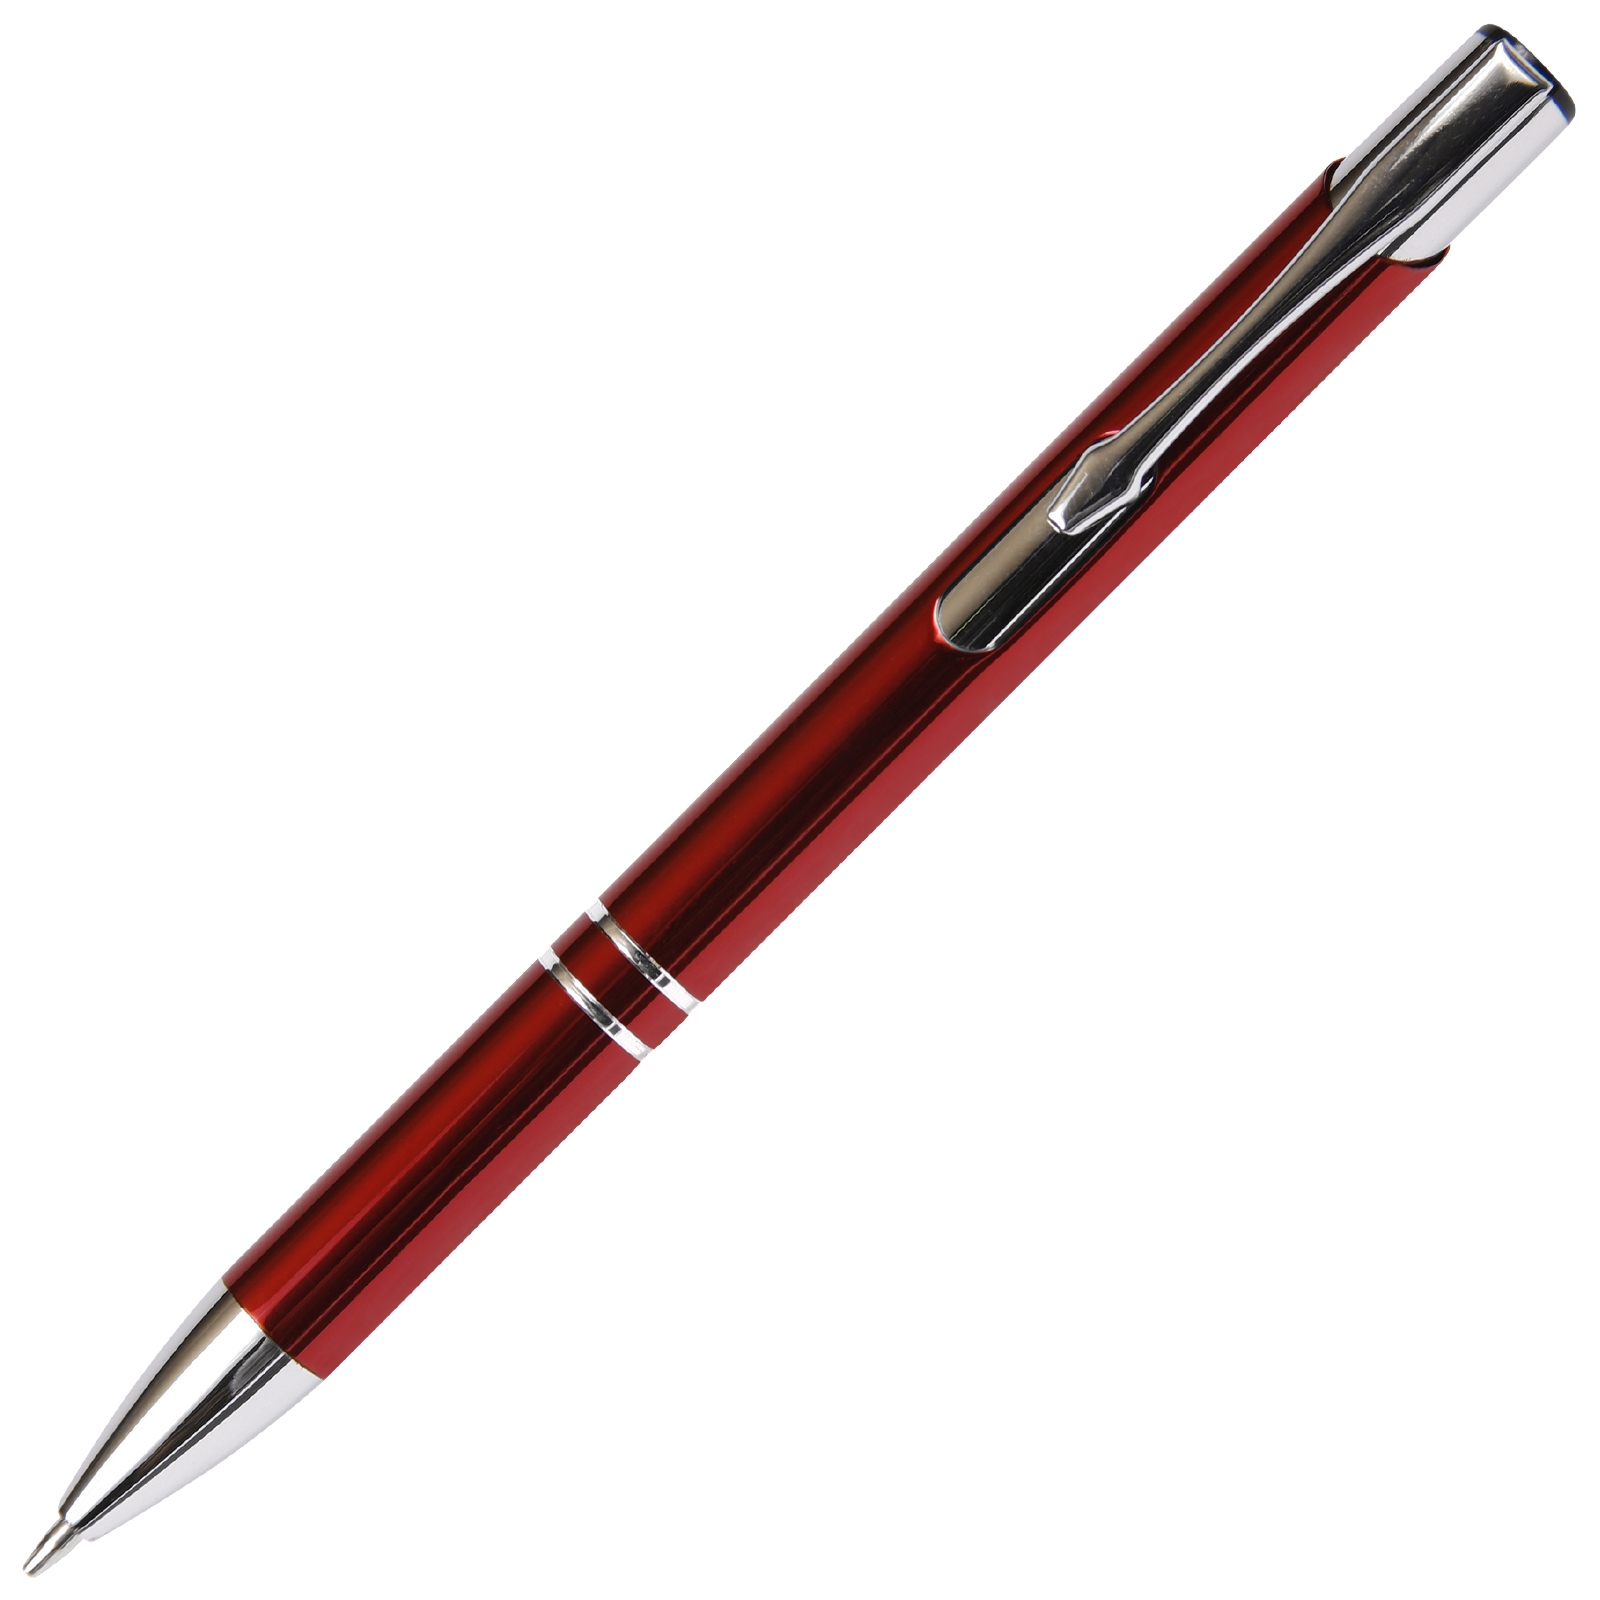 Budget Friendly JJ Mechanical Pencil - Red with Standard 0.5mm Lead Refill By Lanier Pens